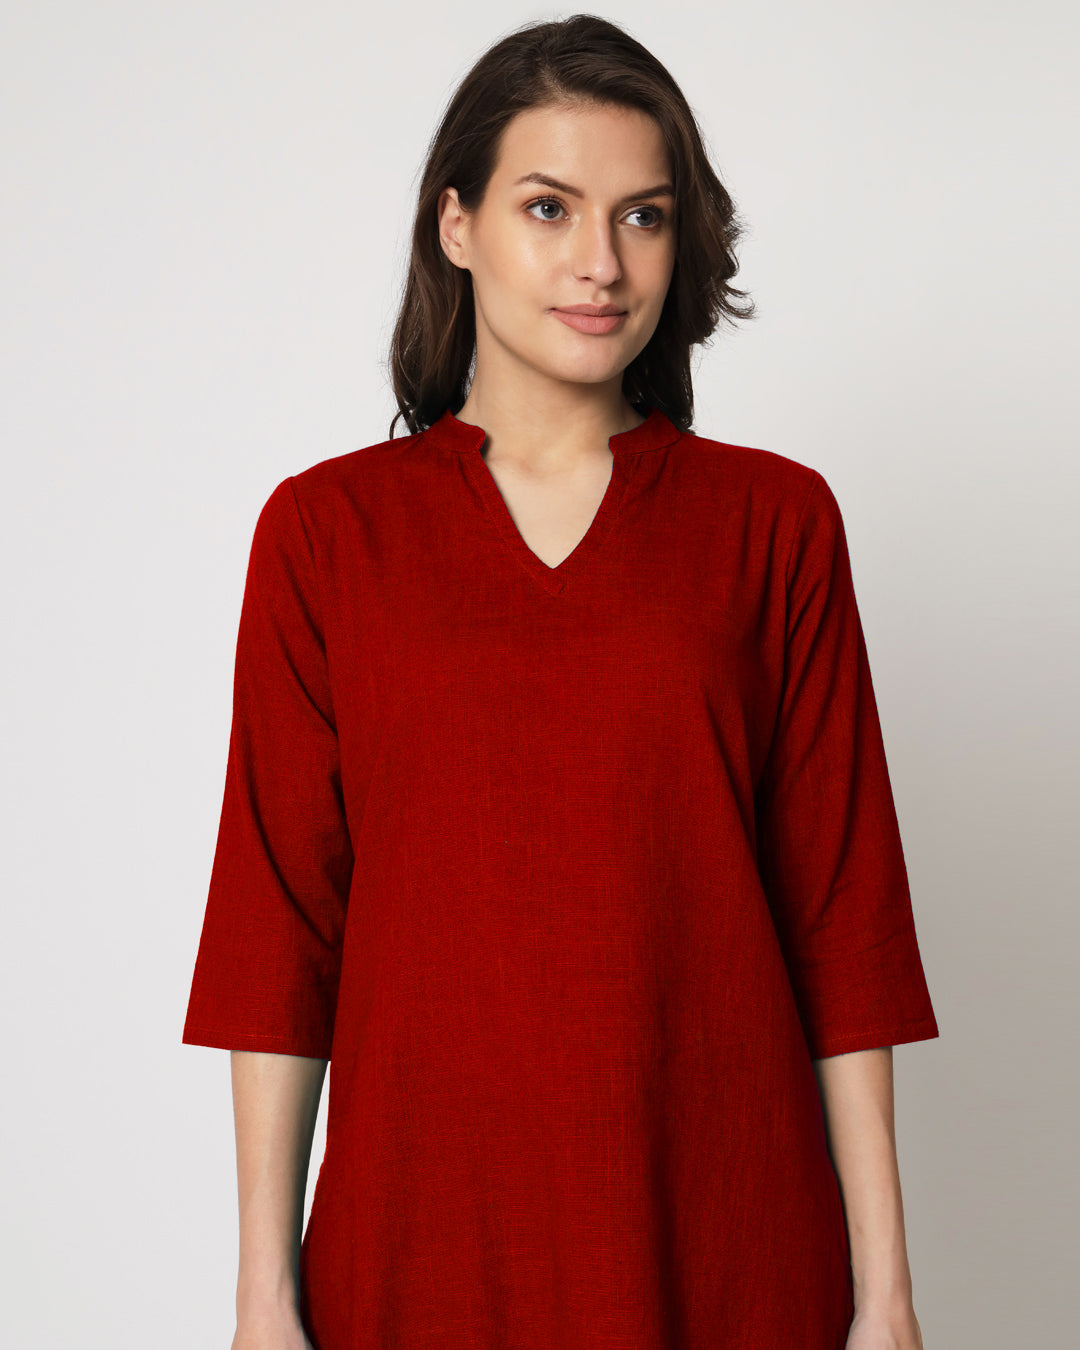 Classic Red Collar Neck Mid Length Solid Kurta (Without Bottoms)